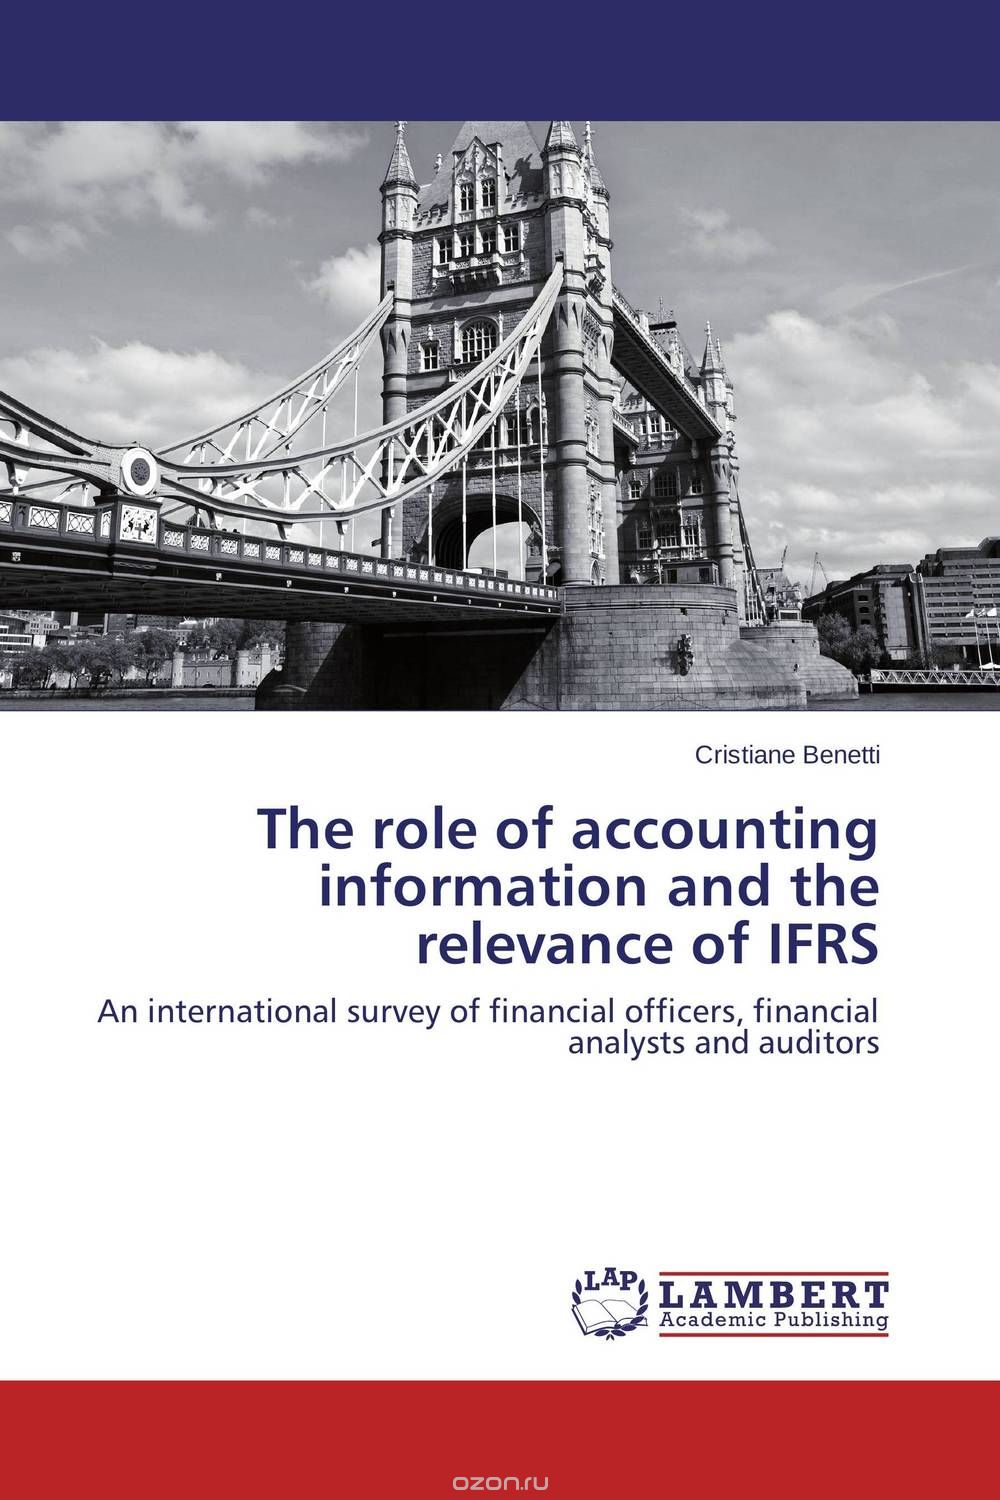 The role of accounting information and the relevance of IFRS